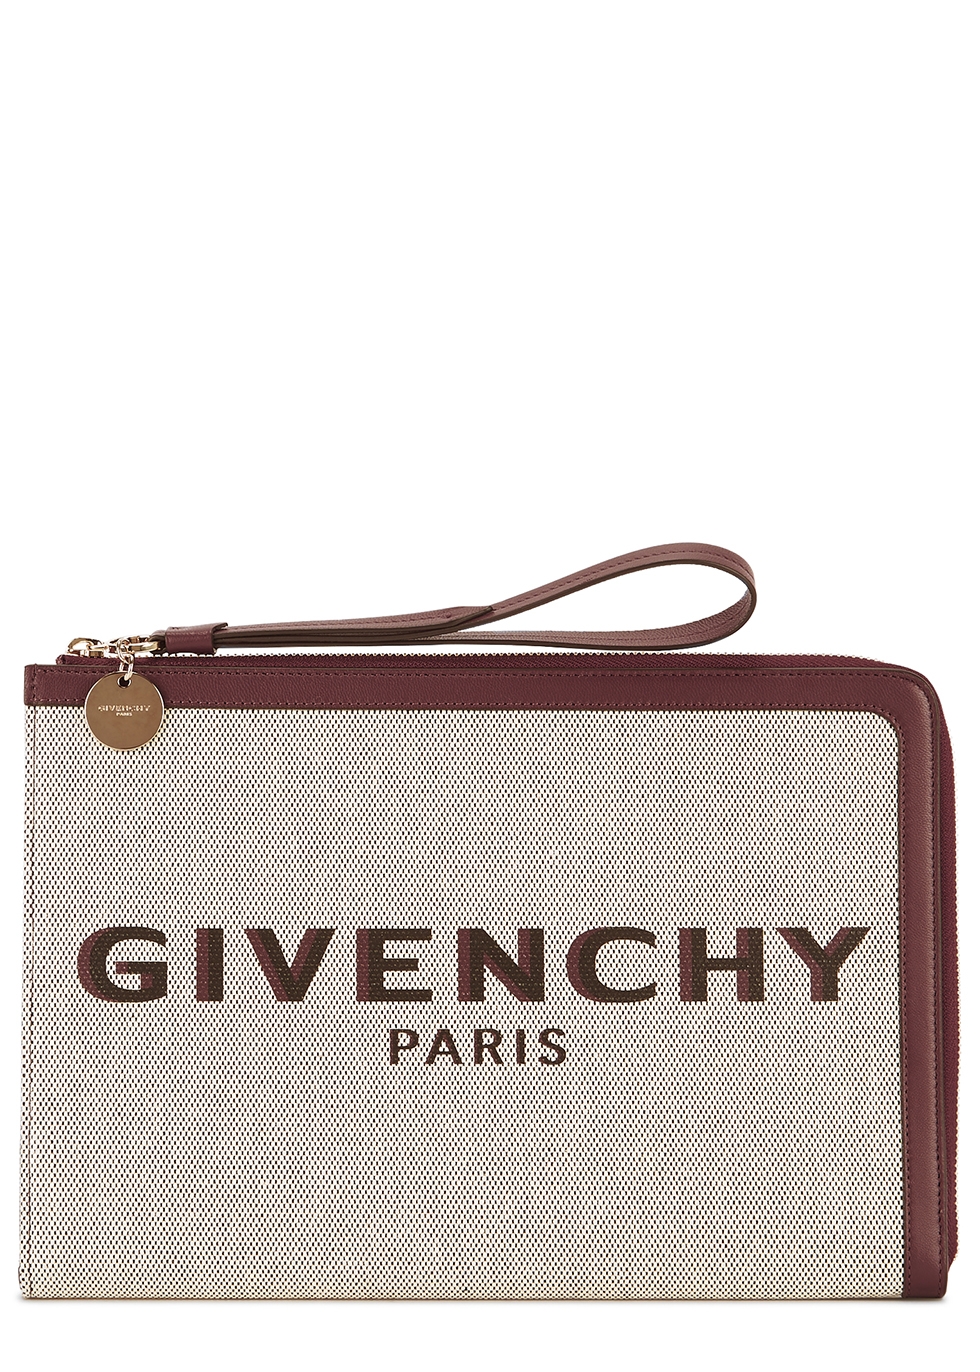 givenchy logo pouch